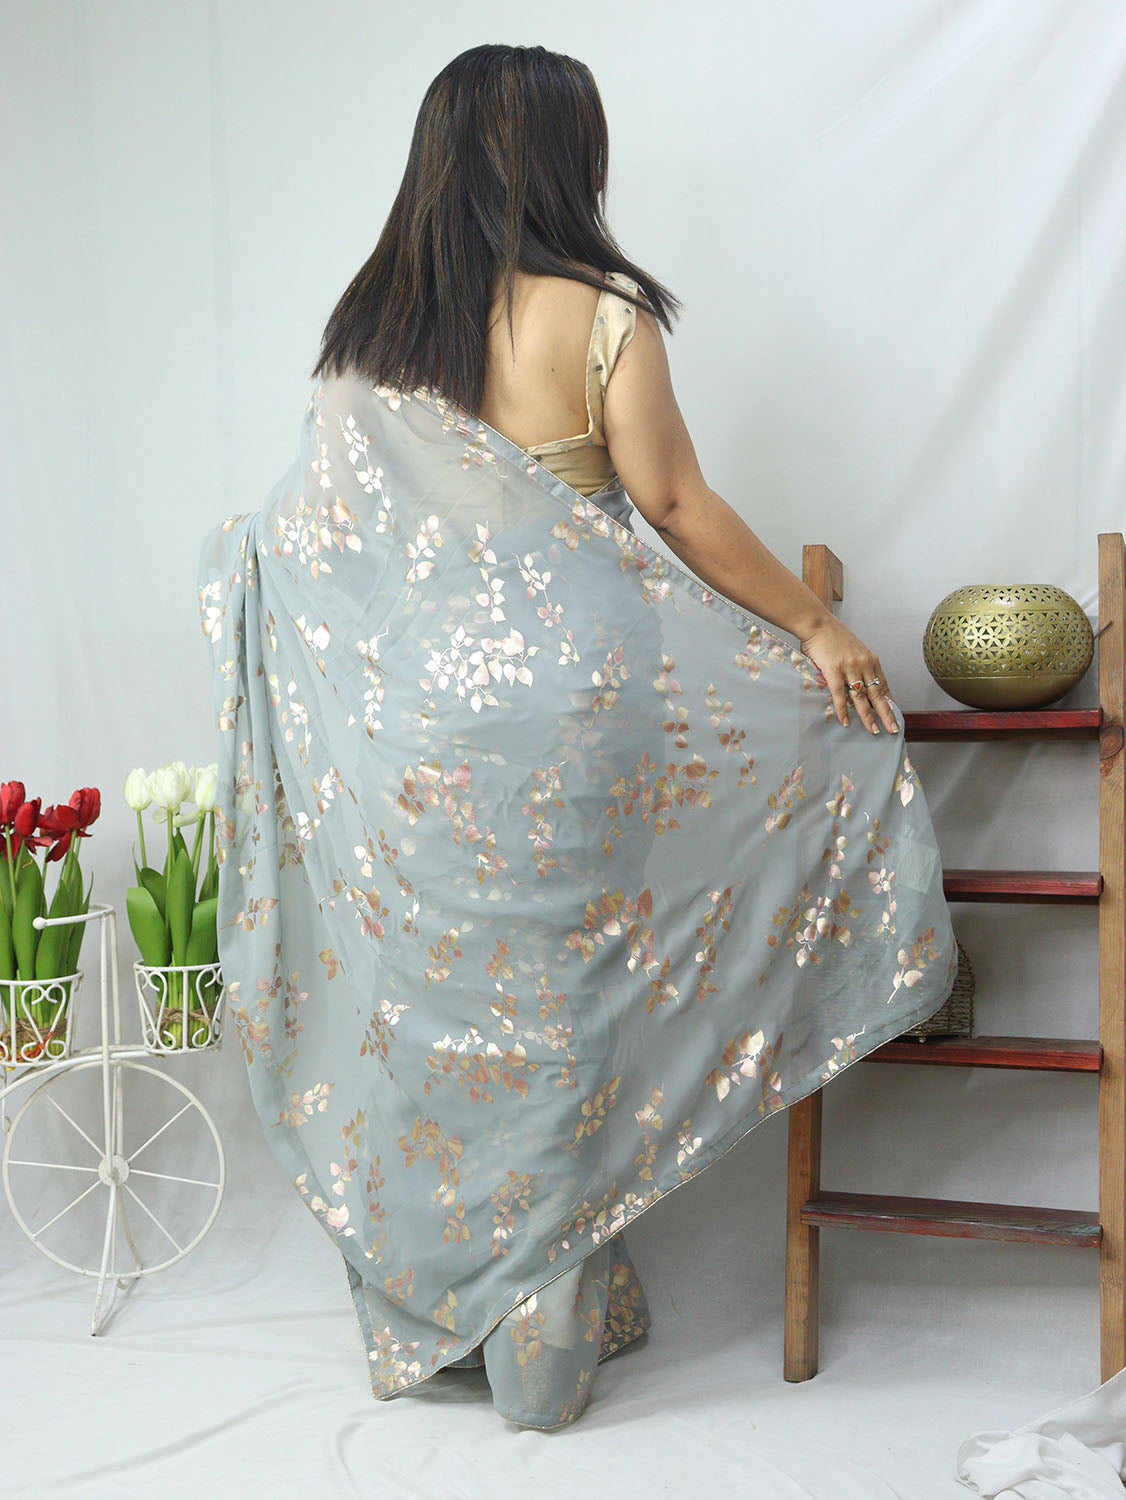 Stylish Grey Georgette Saree with Trendy Foil Print - Perfect for Any Occasion! - Luxurion World